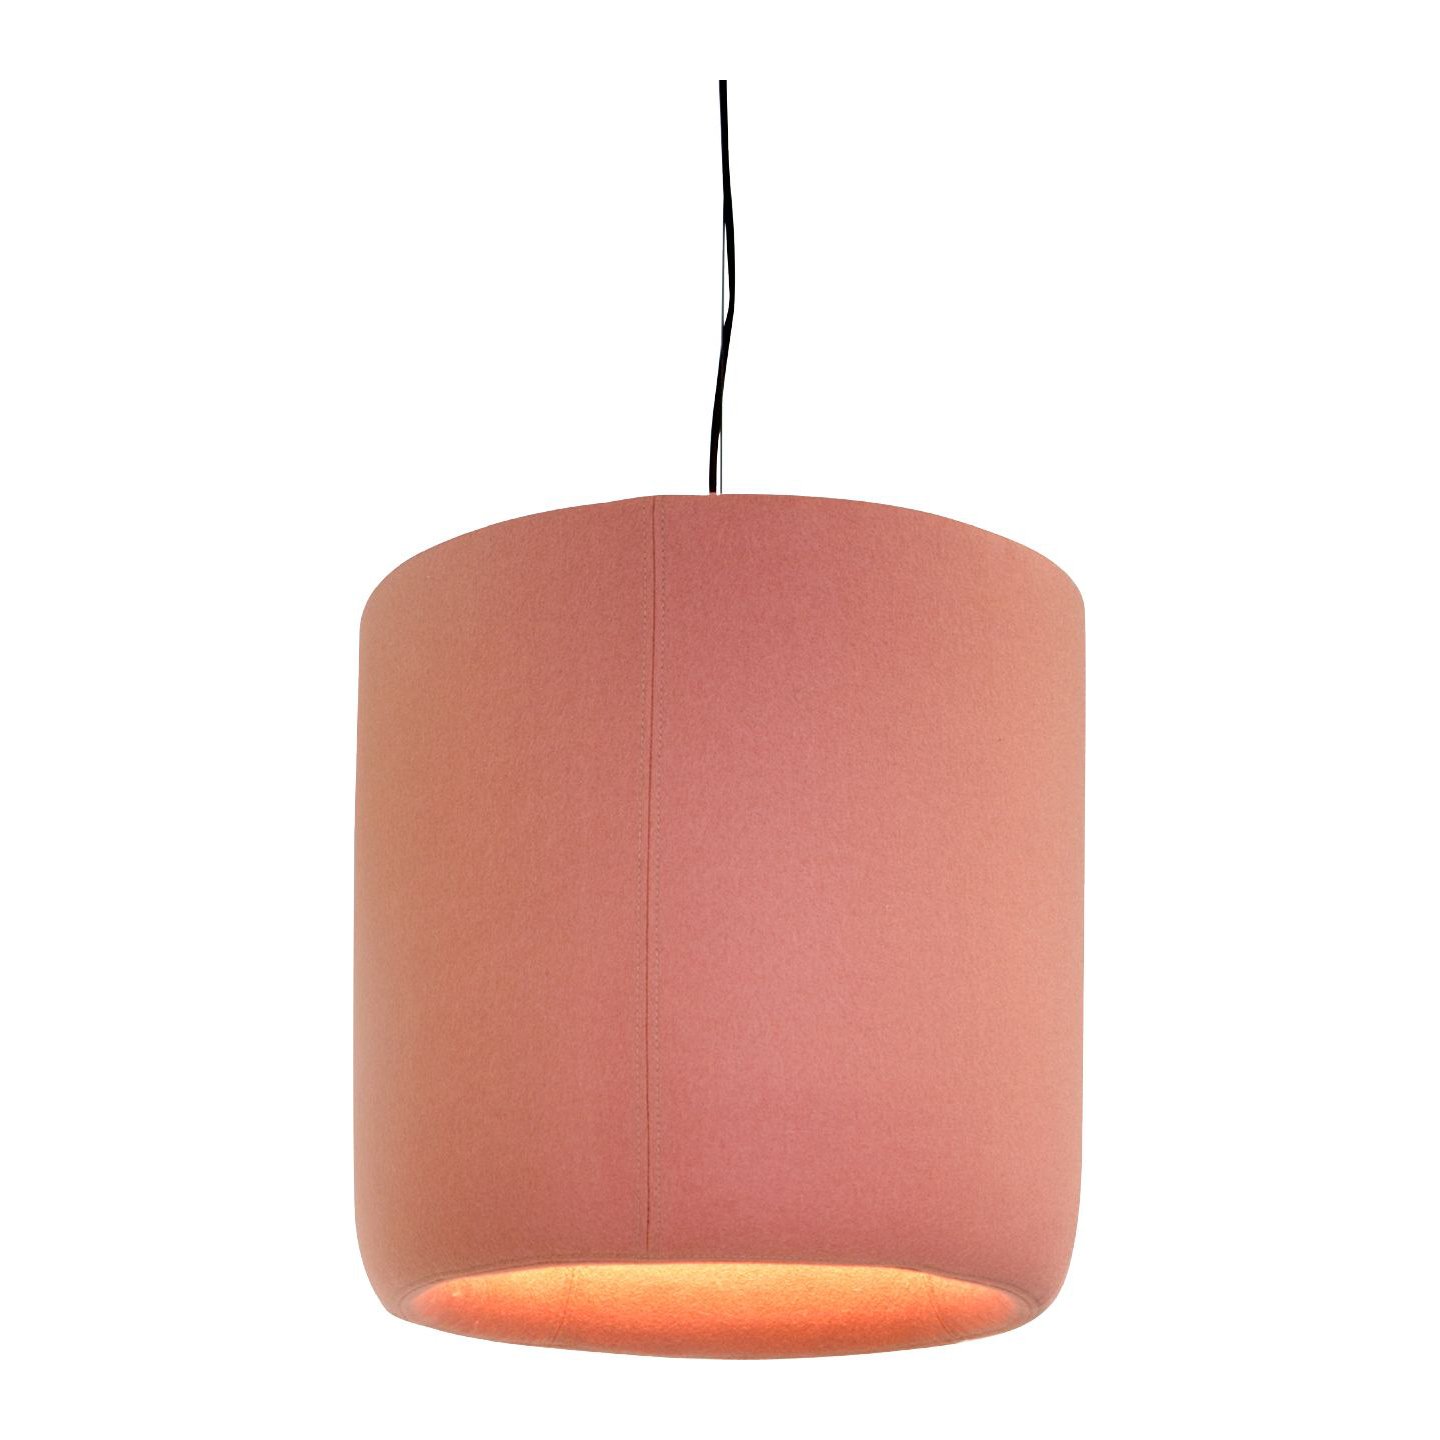 Haworth BuzziProp Lighting in a light pink color with light bulb inside